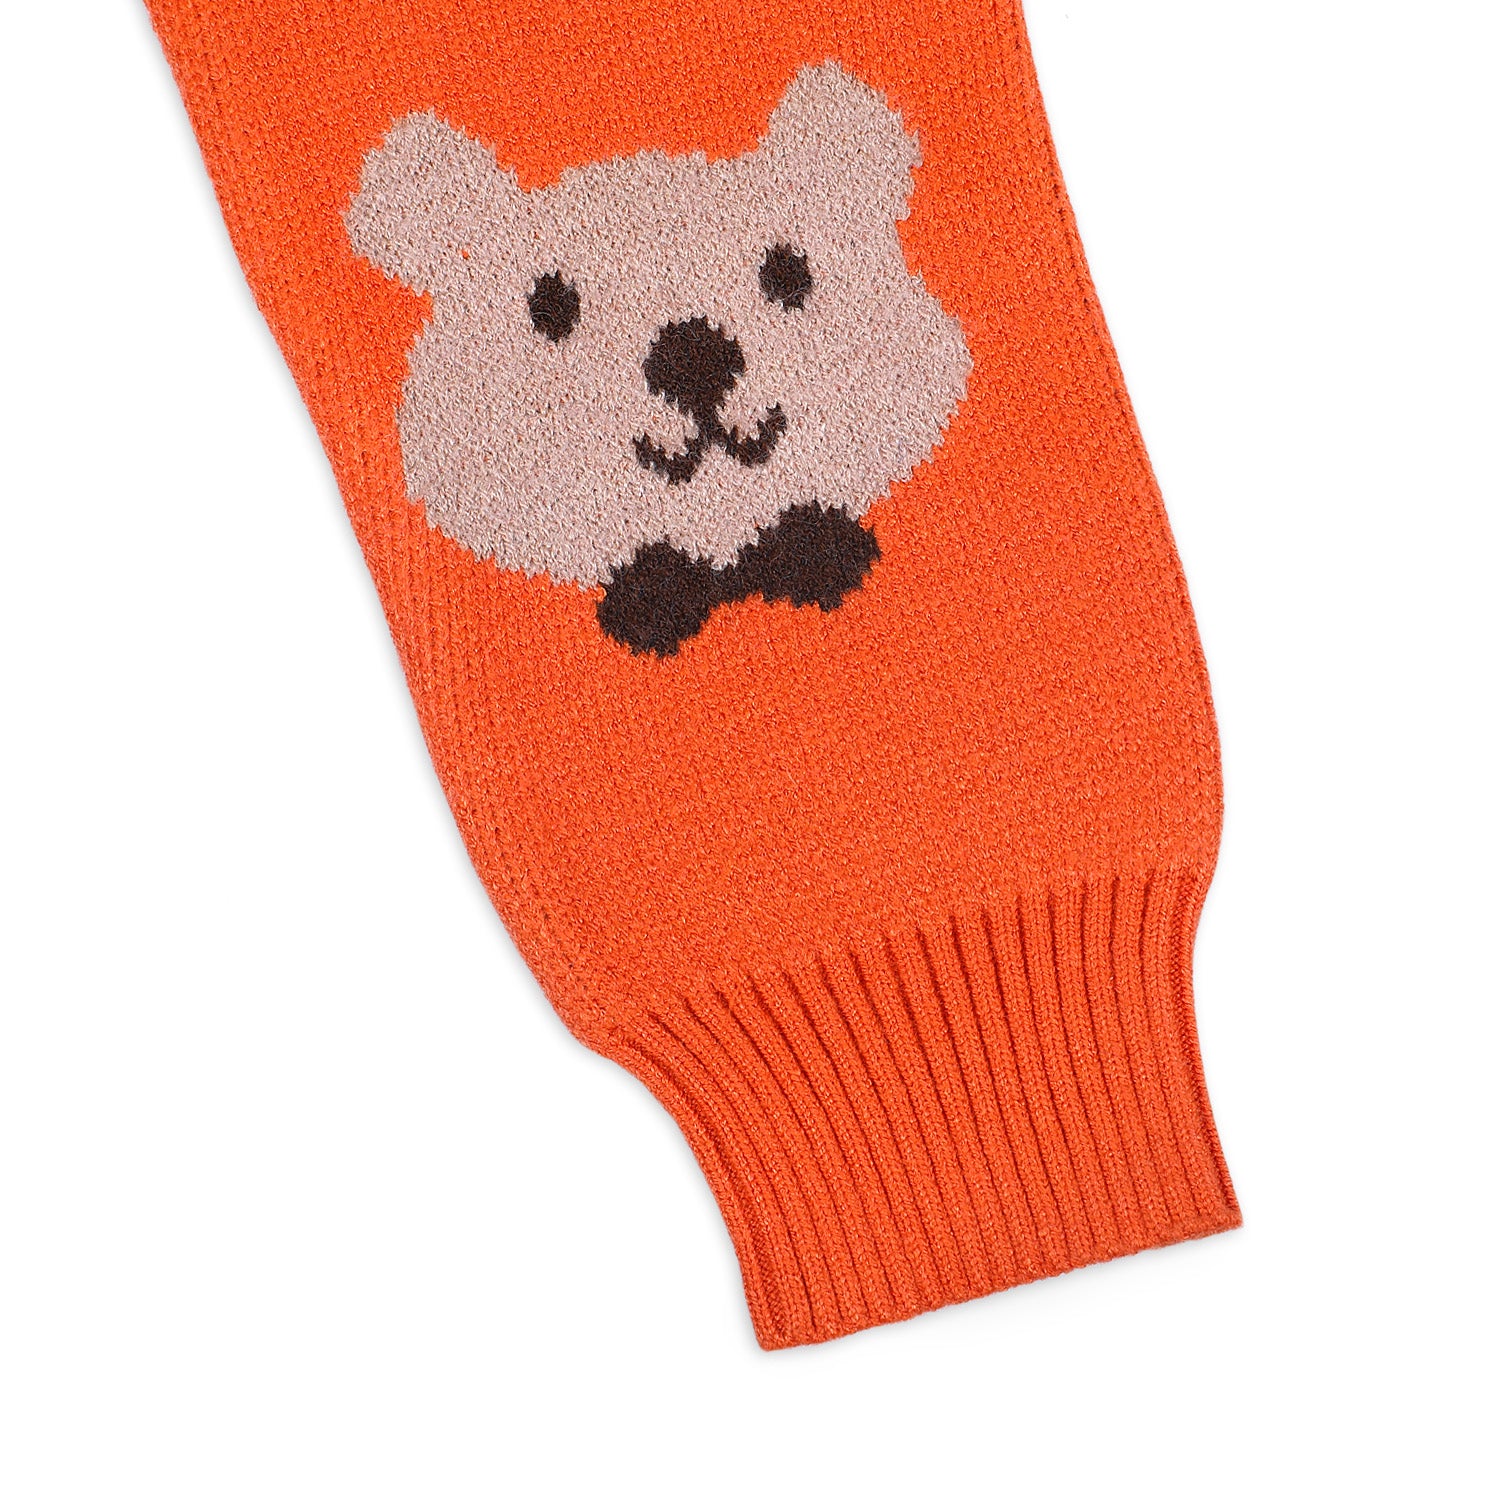 Mr. Bear Premium Full Sleeves Knitted Sweater With 3D Applique - Orange